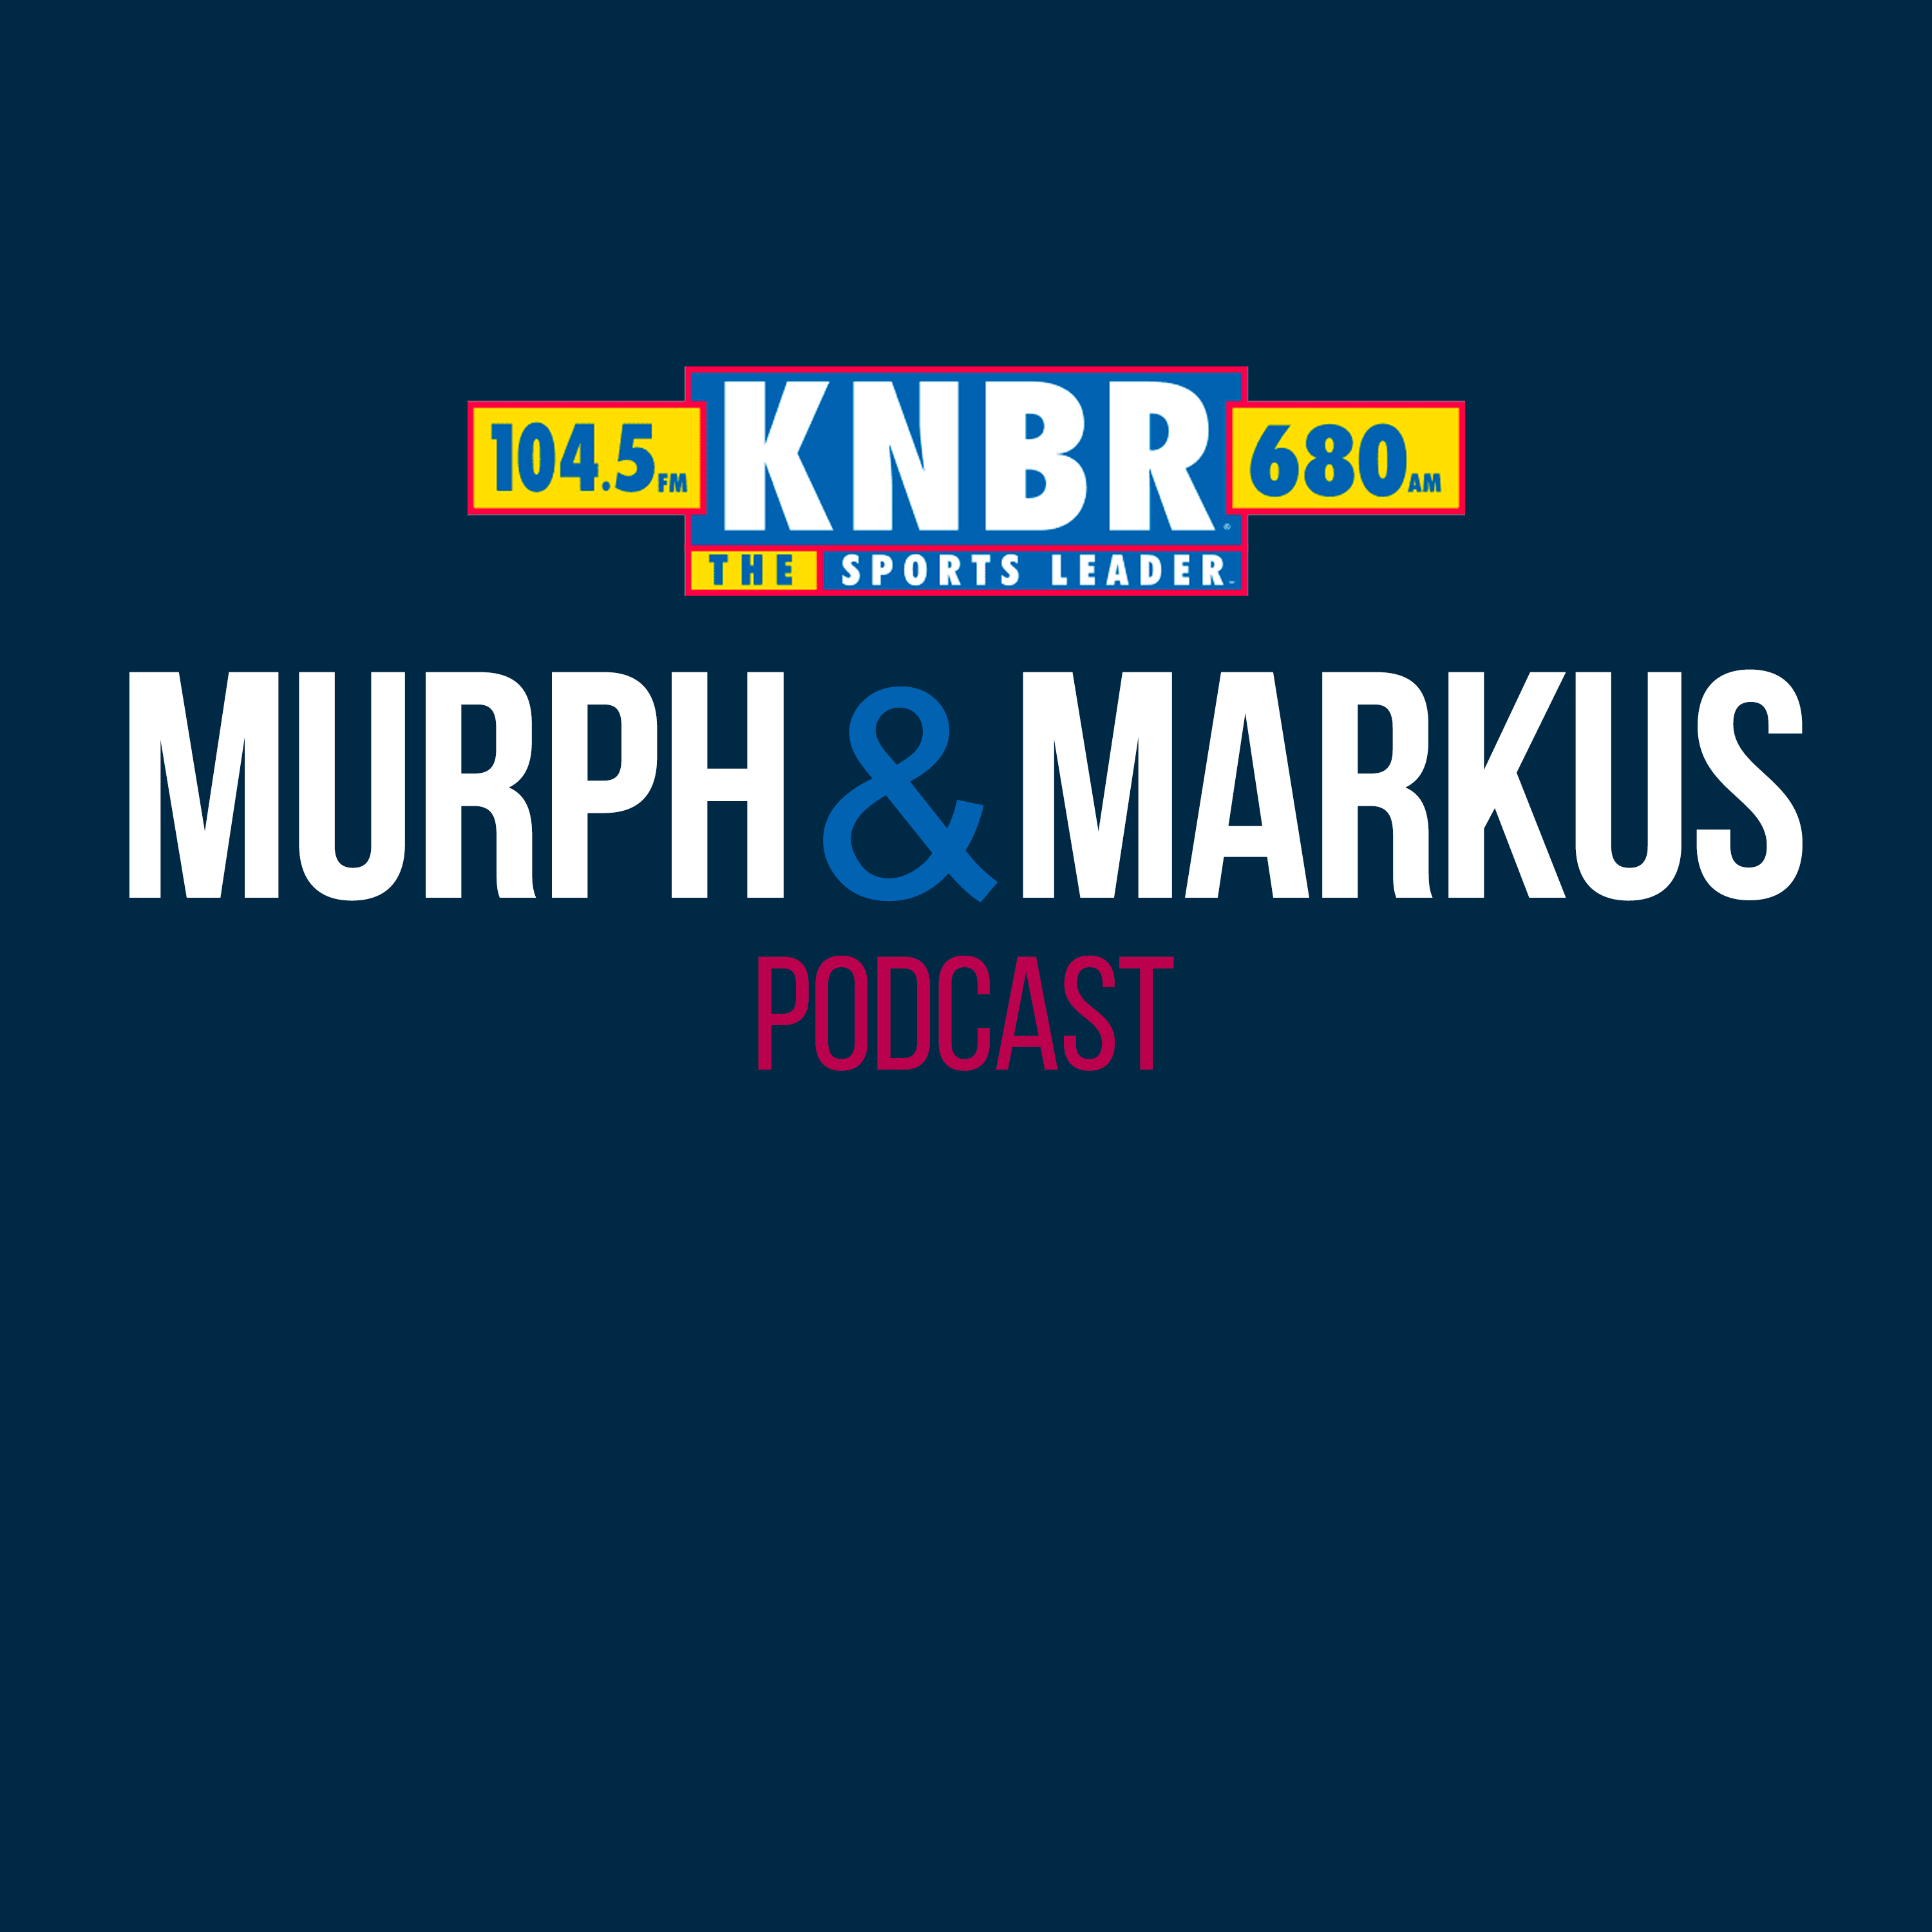 4-11 Hour 4: Murph and Markus reflect back on O.J Simpson's controversial life